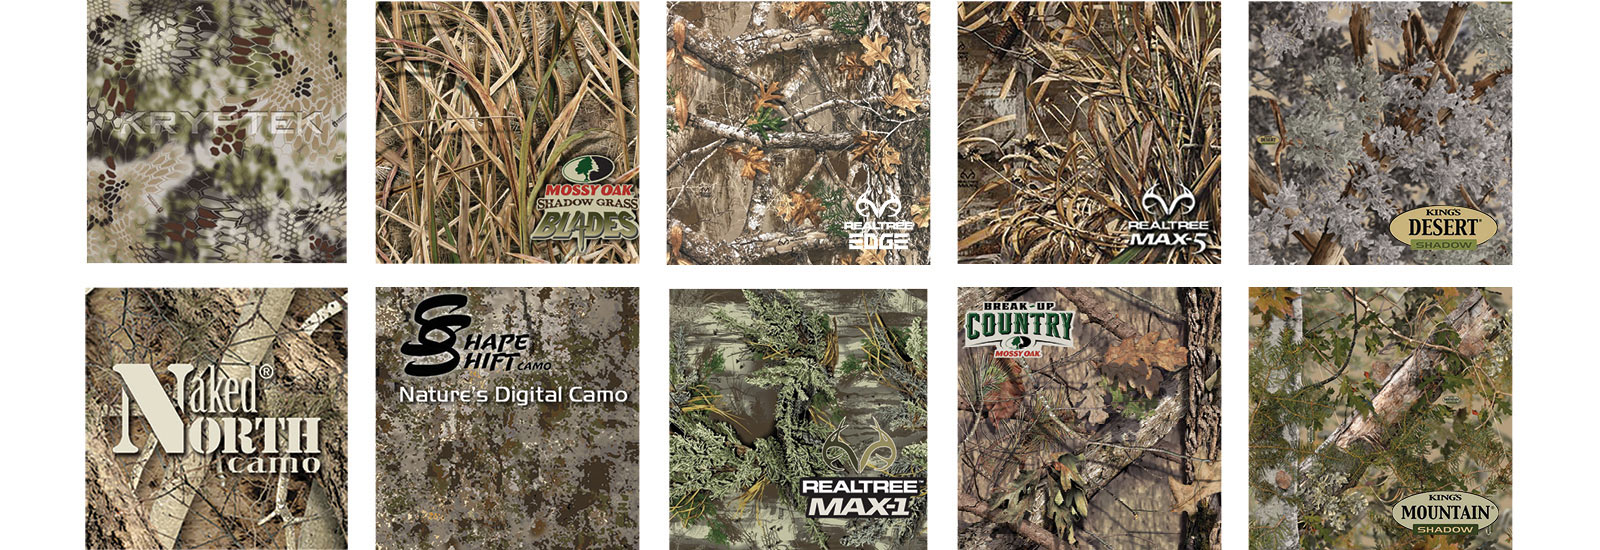 Find everything for your hunt from pack gear to camo to calls to meat grinders at Smith and Edwards Co!